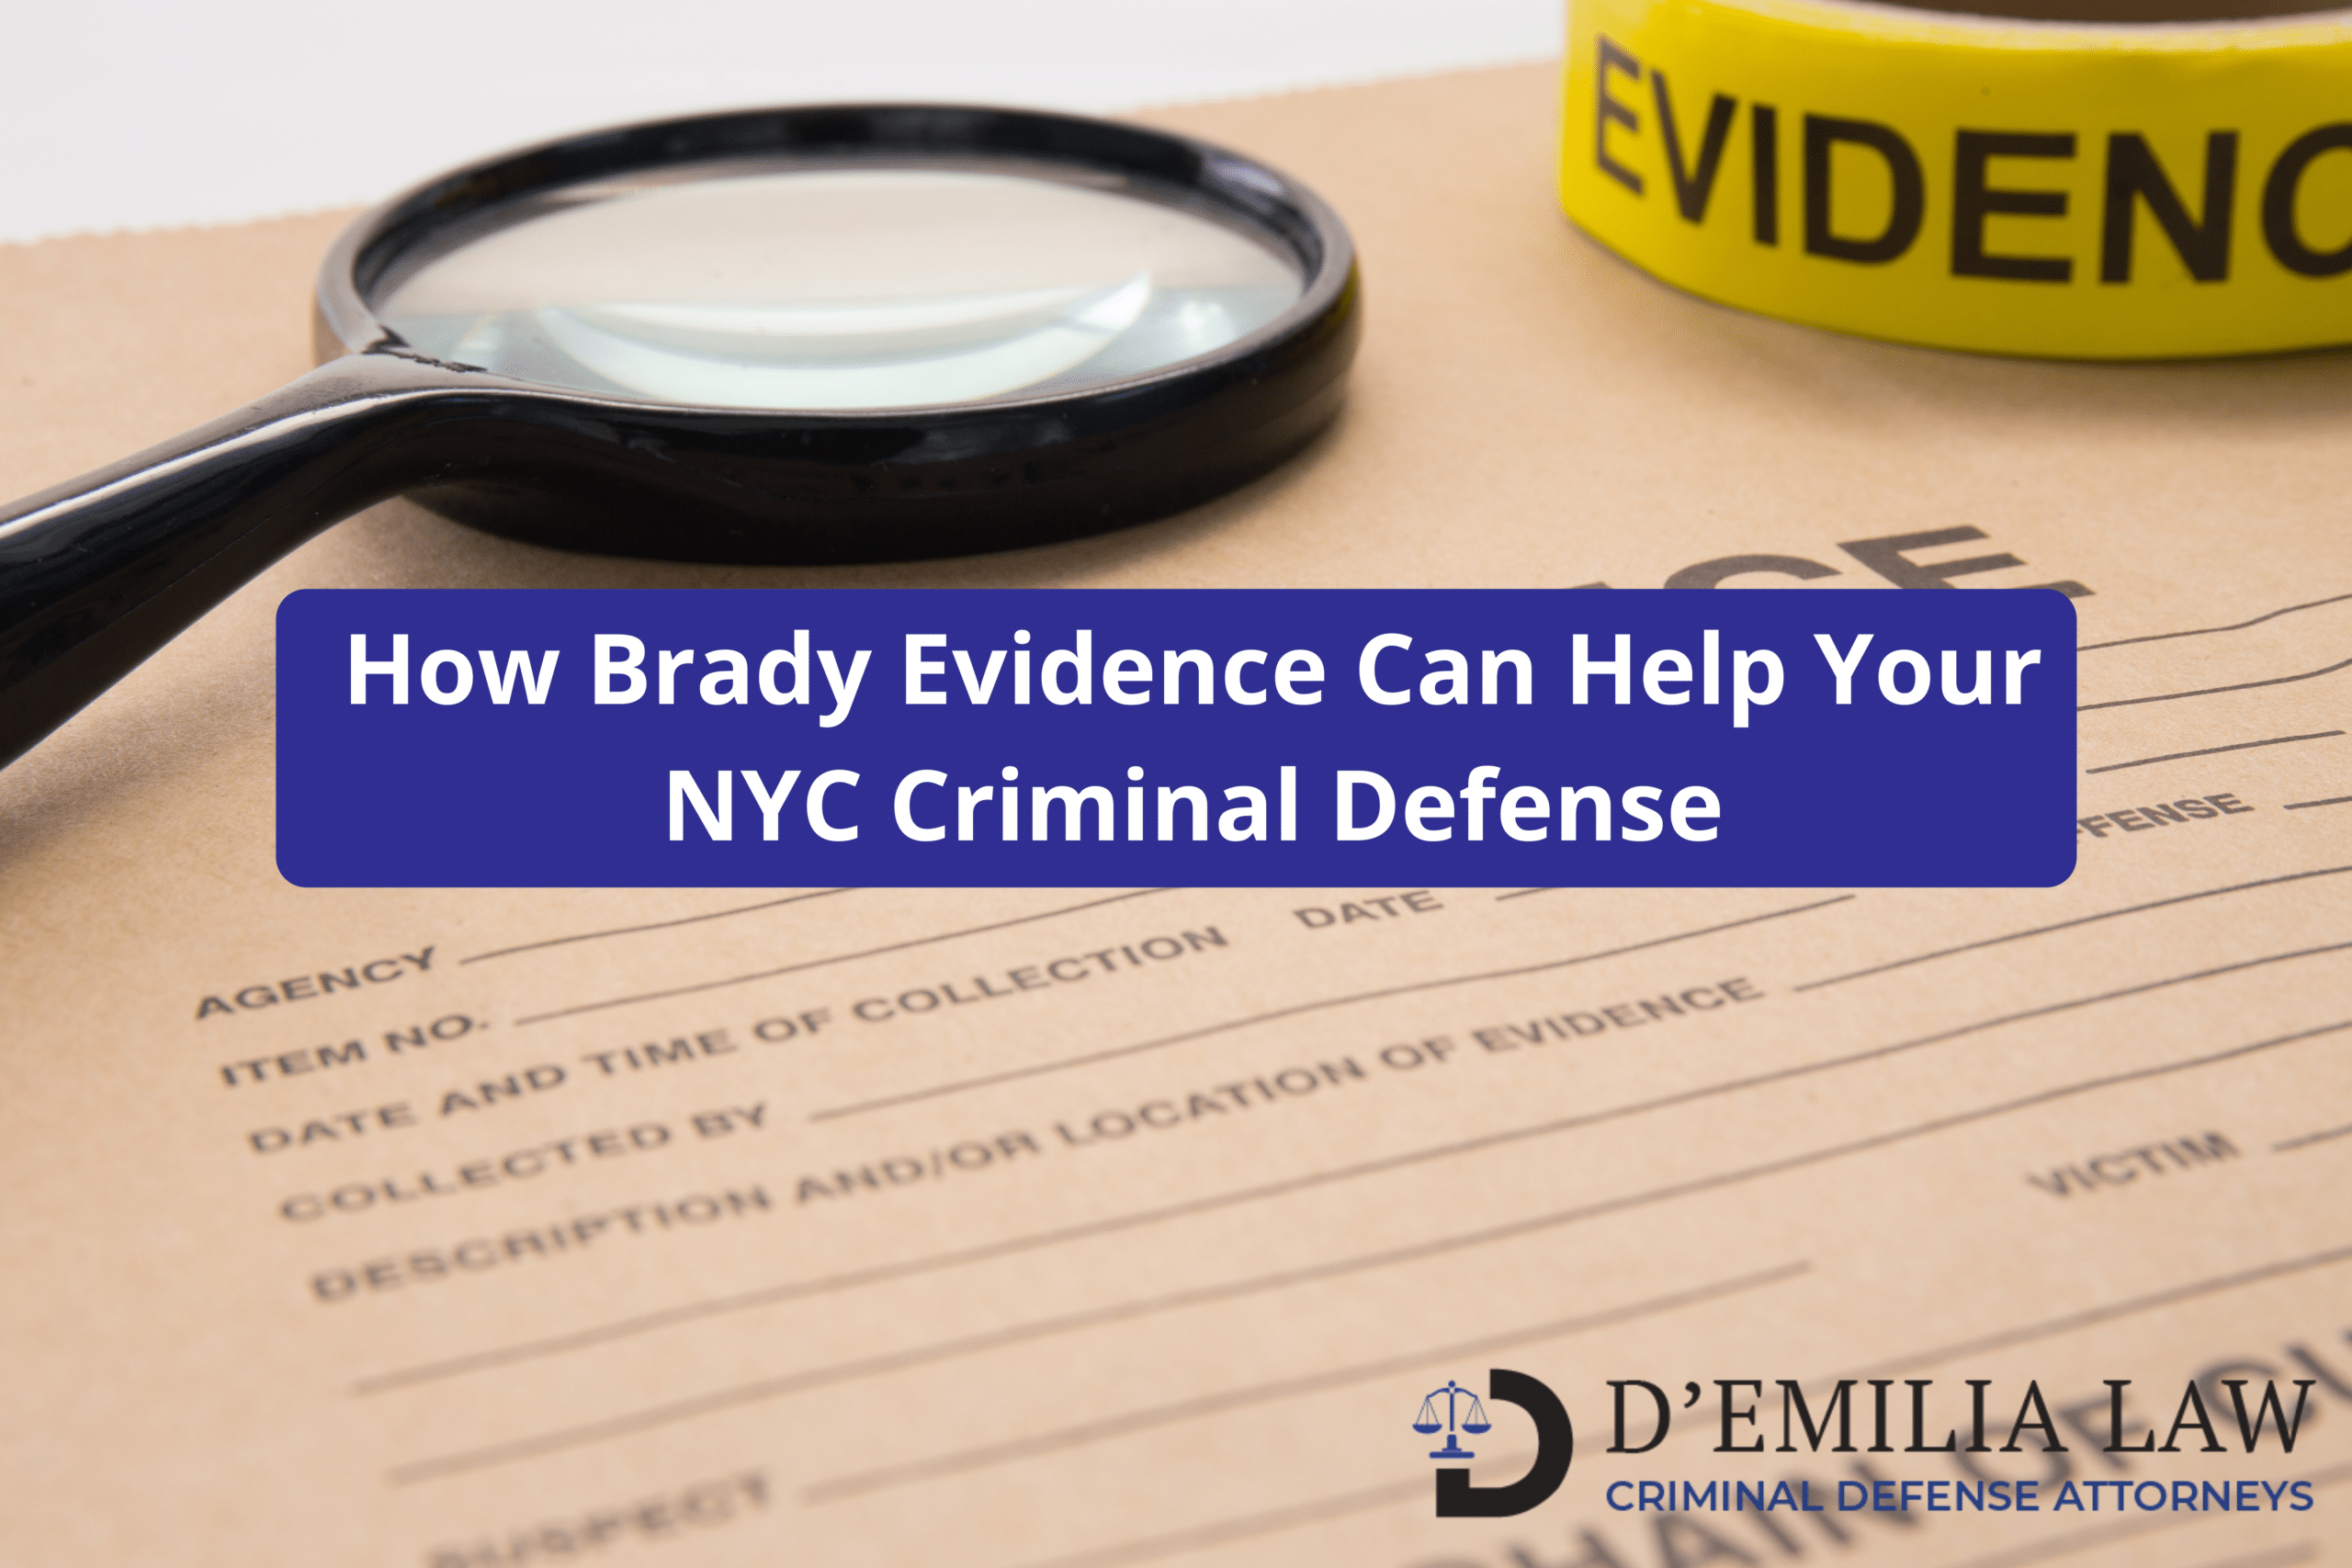 How Brady Material Can Help Your NYC Criminal Defense